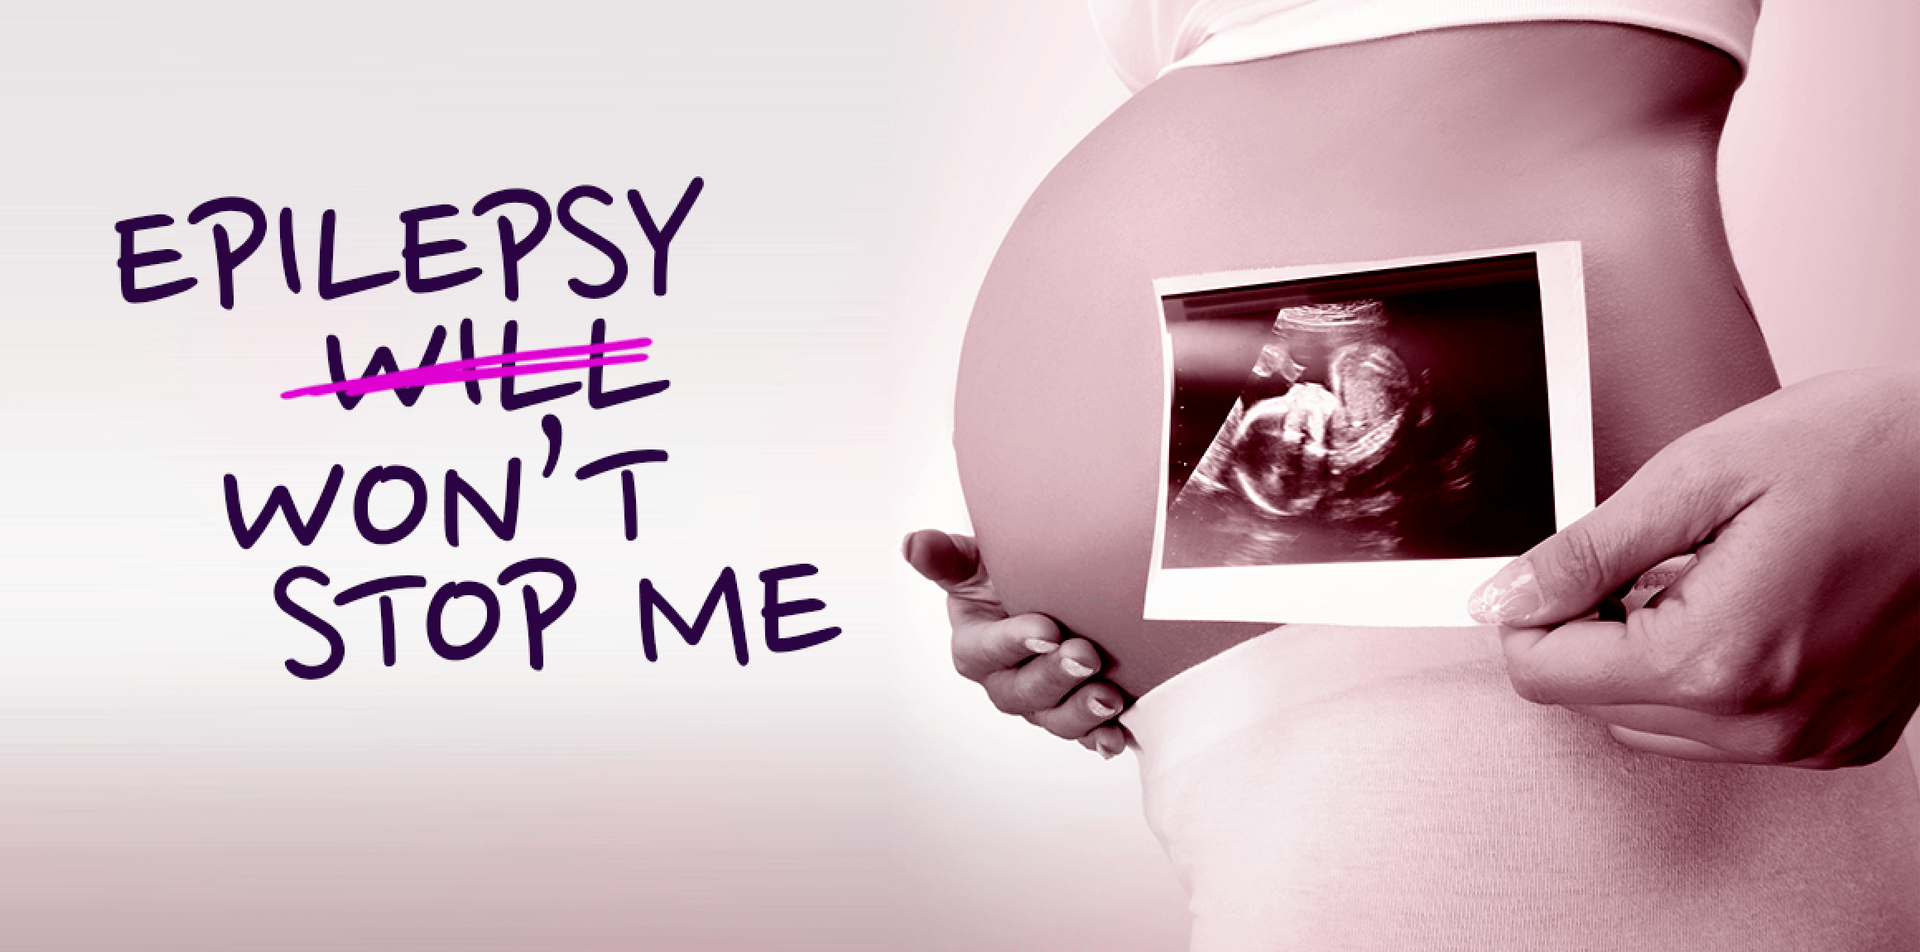 Epilepsy won't stop me. Pregnancy and epilepsy support.